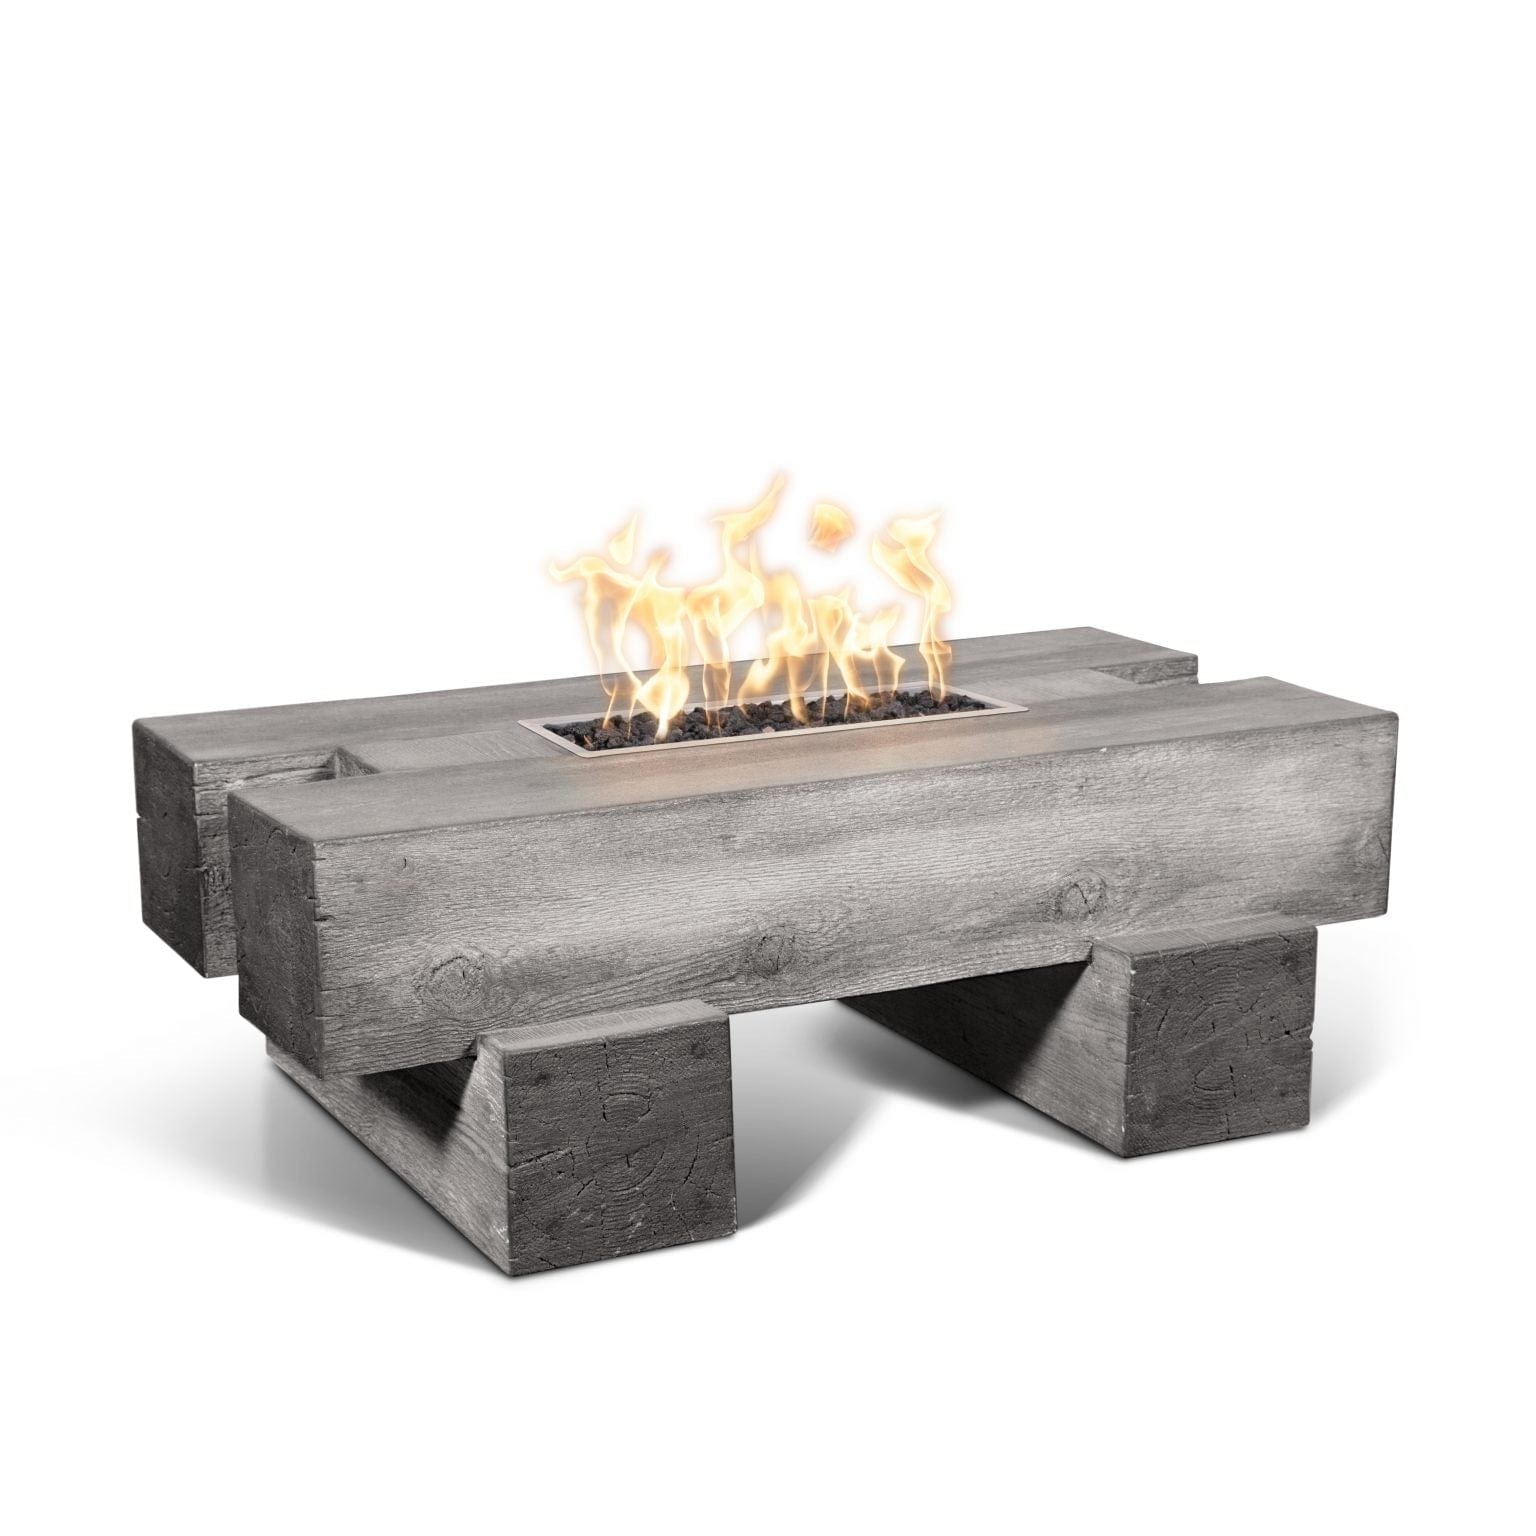 The Outdoor Plus Fire Pit 48" / Flame Sense System with Push Button Spark Igniter The Outdoor Plus Palo Fire Pit | Wood Grain OPT-PAL48FSEN